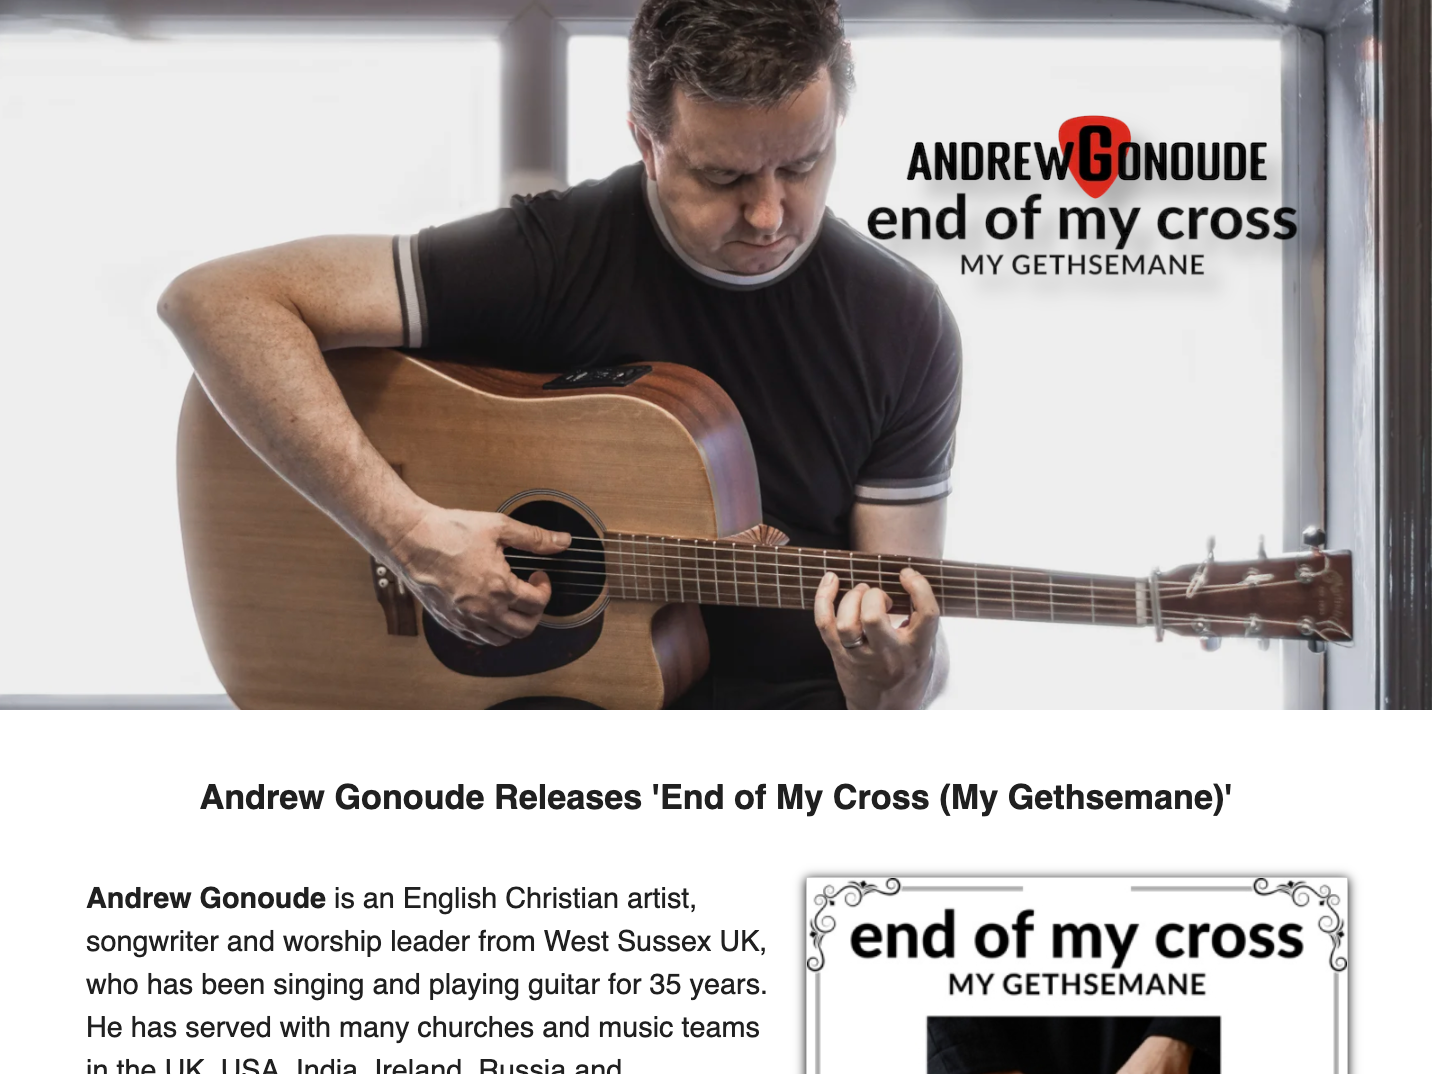 LOUDER THAN THE MUSIC promotes END OF MY CROSS